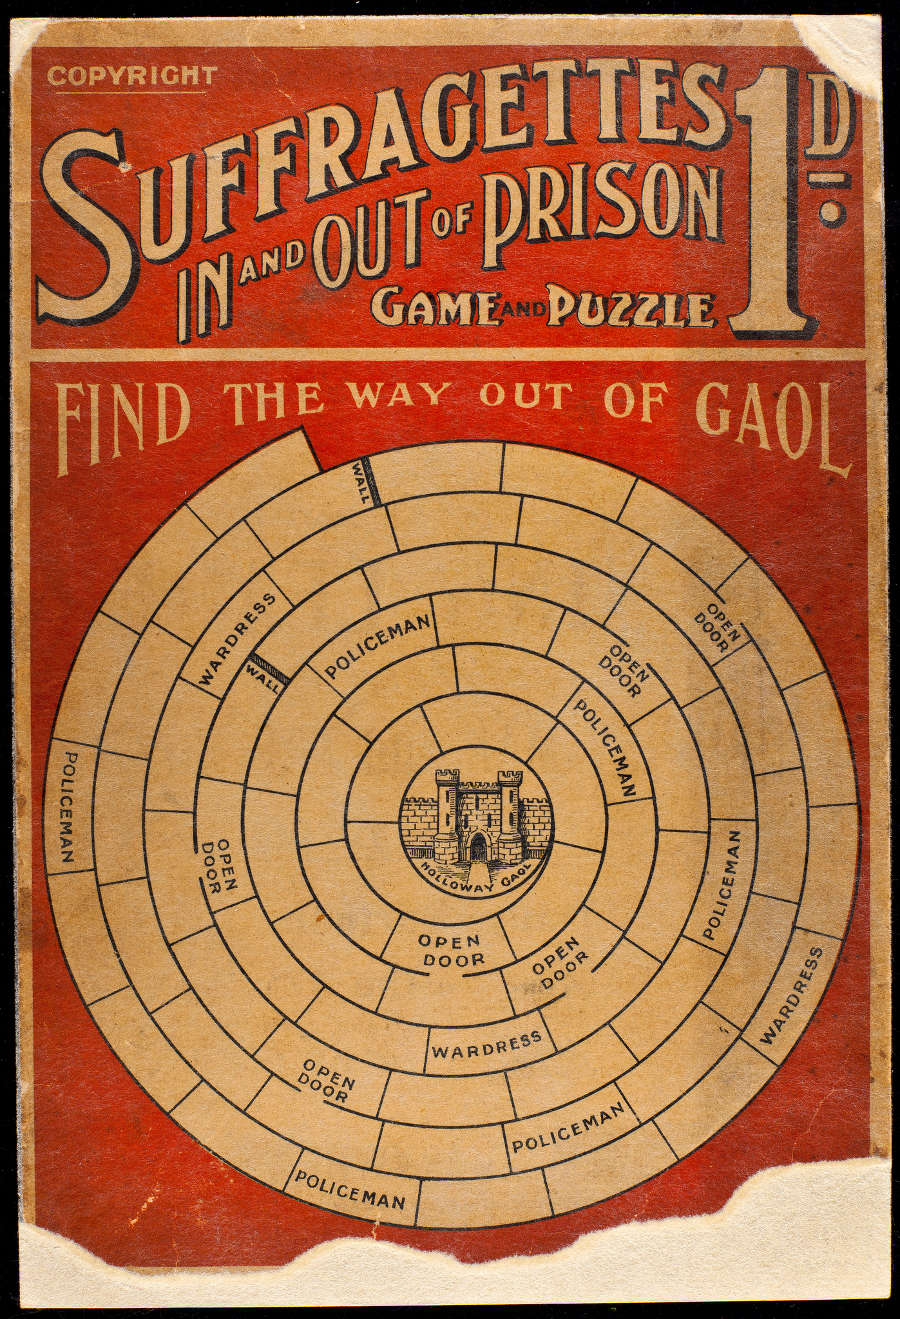 Image of the front cover of the ‘Suffragettes In and Out of Prison Game and Puzzle’.